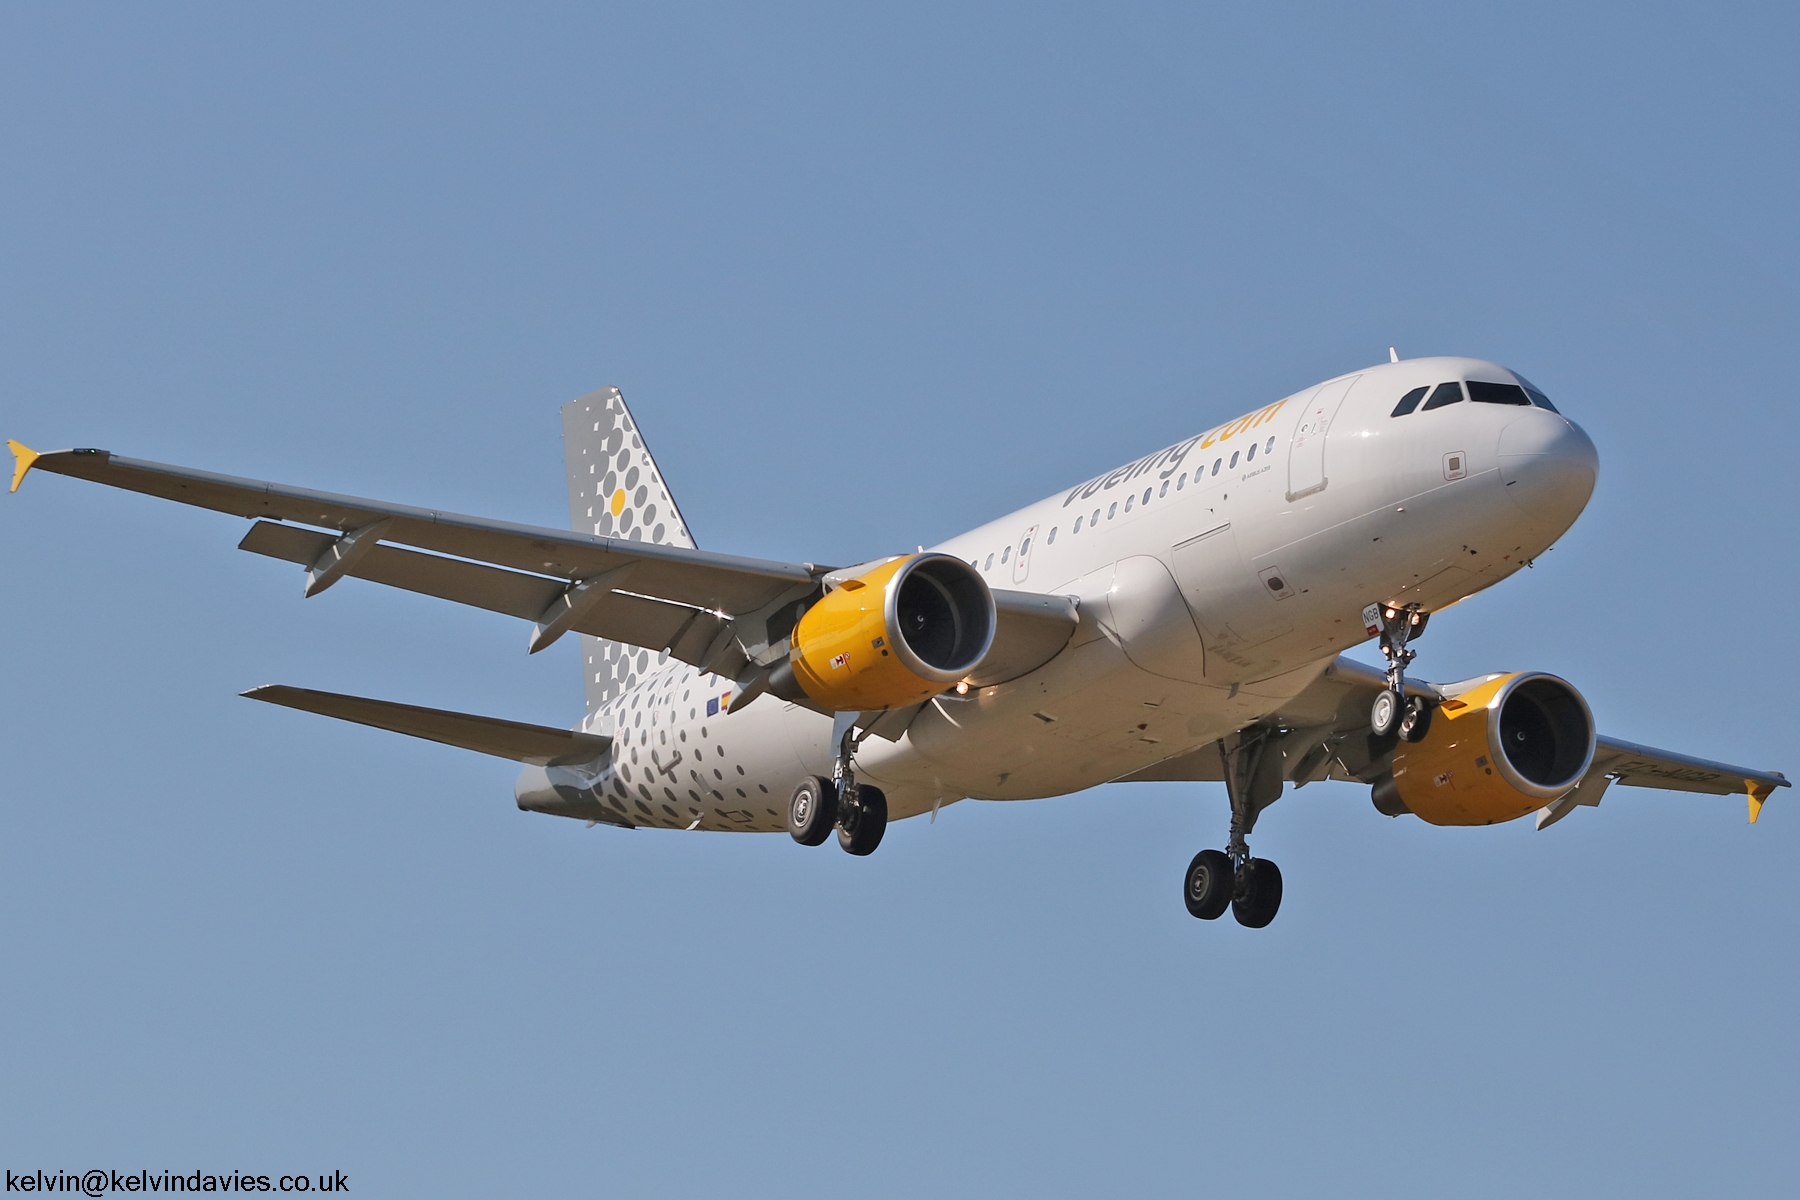 Vueling Airlines A319 EC-NGB